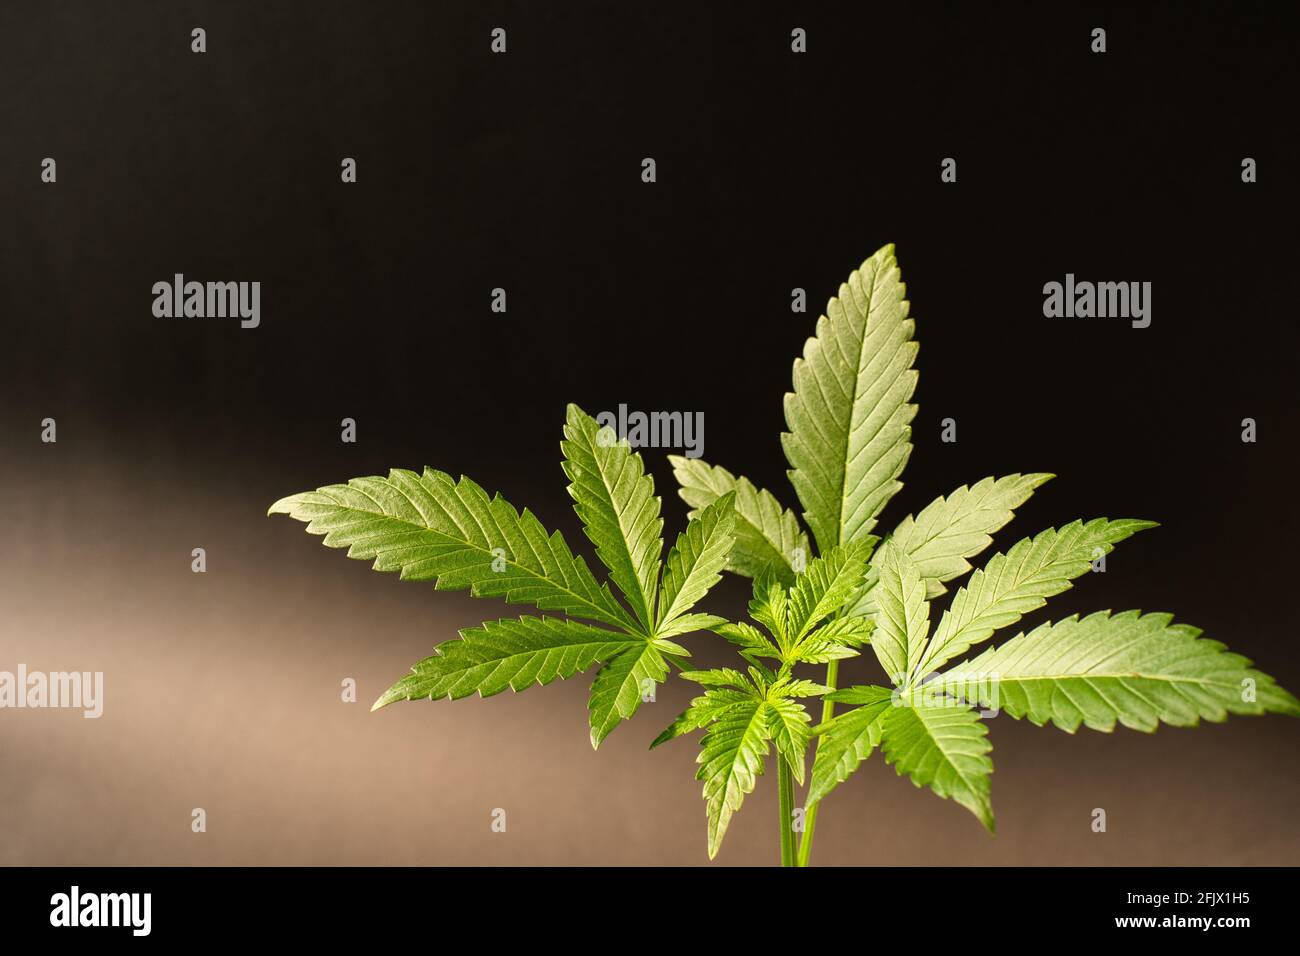 Green leafs of a young cannabis plant, Bubble Kush Automatic, black background with light gradient, horizontal format Stock Photo